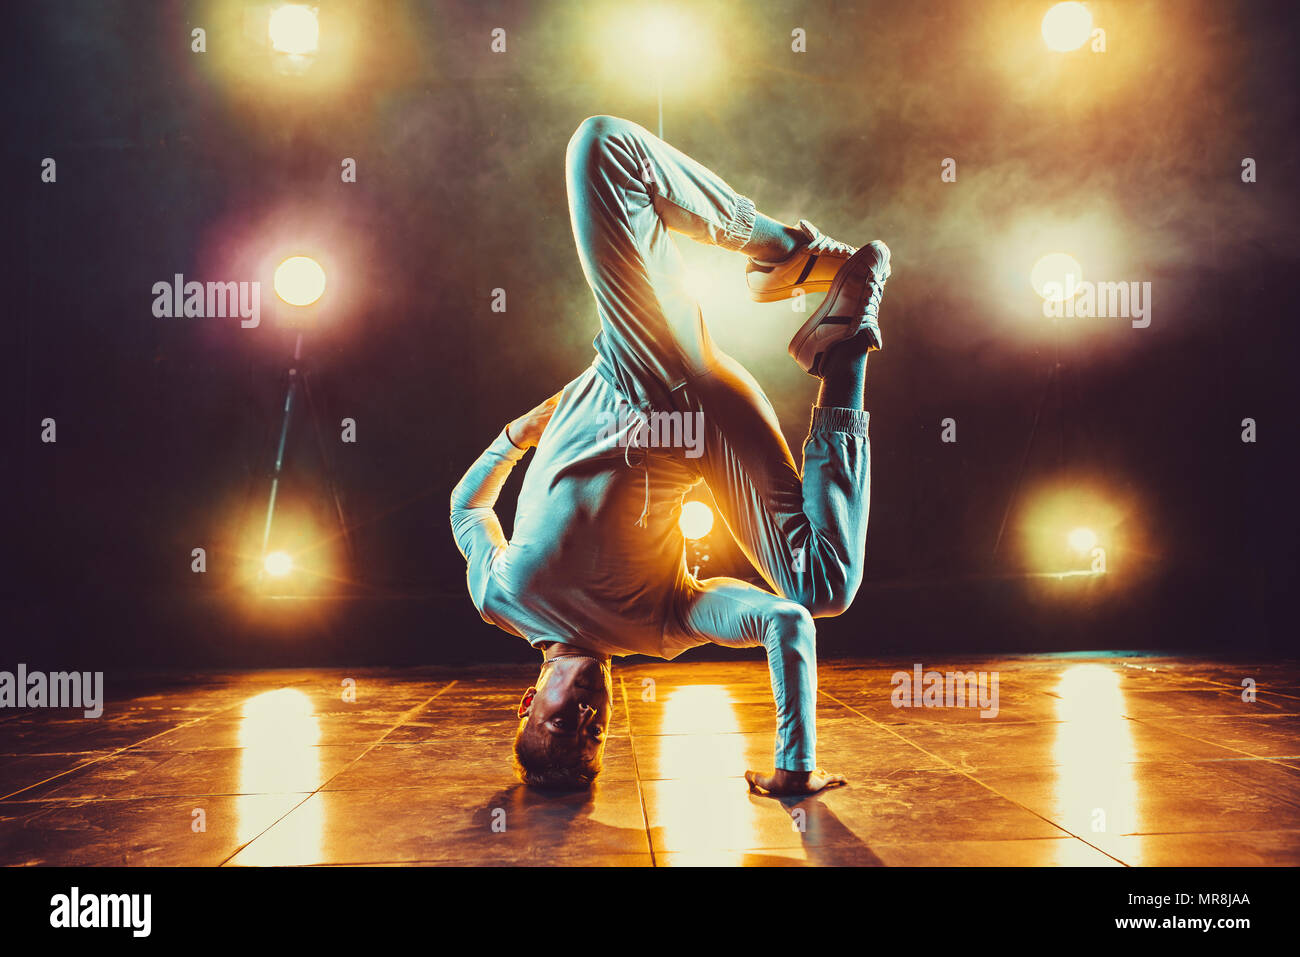 Young man break dancing in club with lights and smoke. Warm colors. Stock Photo